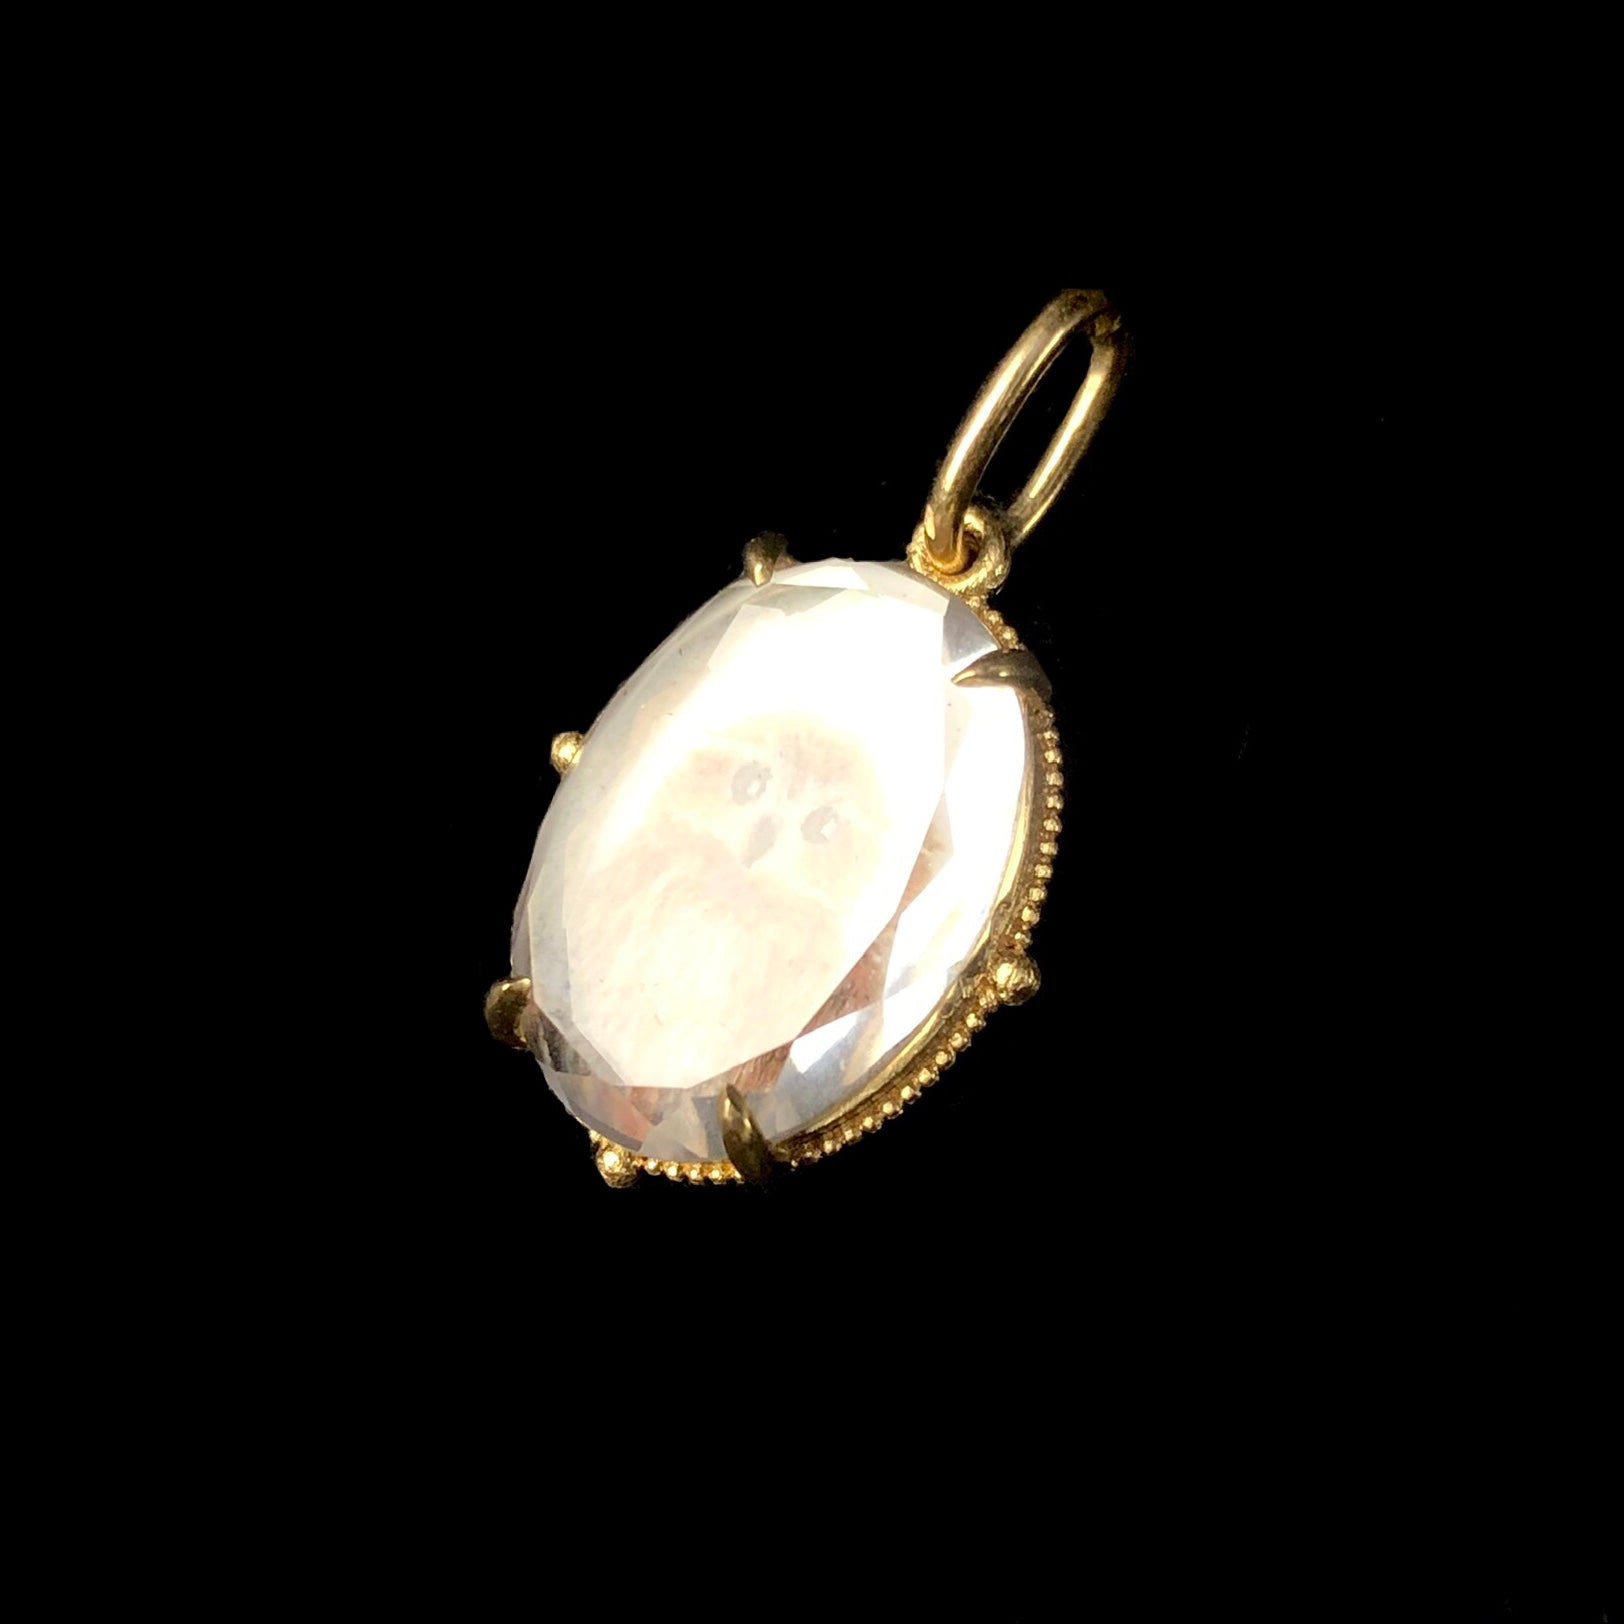 Detail view of White Sapphire Crystal face with gold prong setting